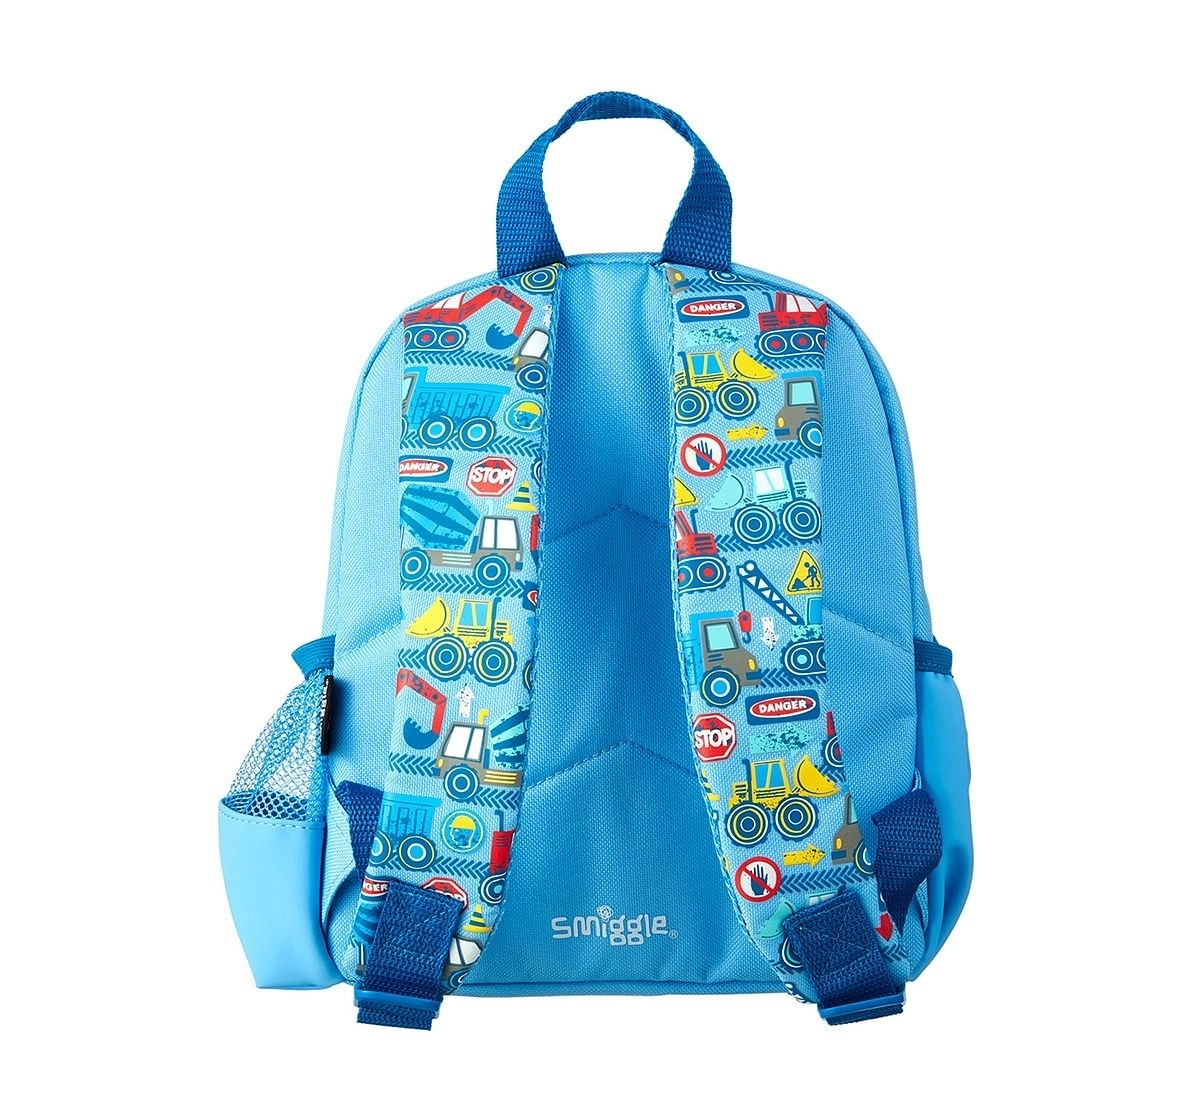 Smiggle Topsy Teeny Tiny Backpack - Car Print Bags for Kids age 3Y+ (Blue)